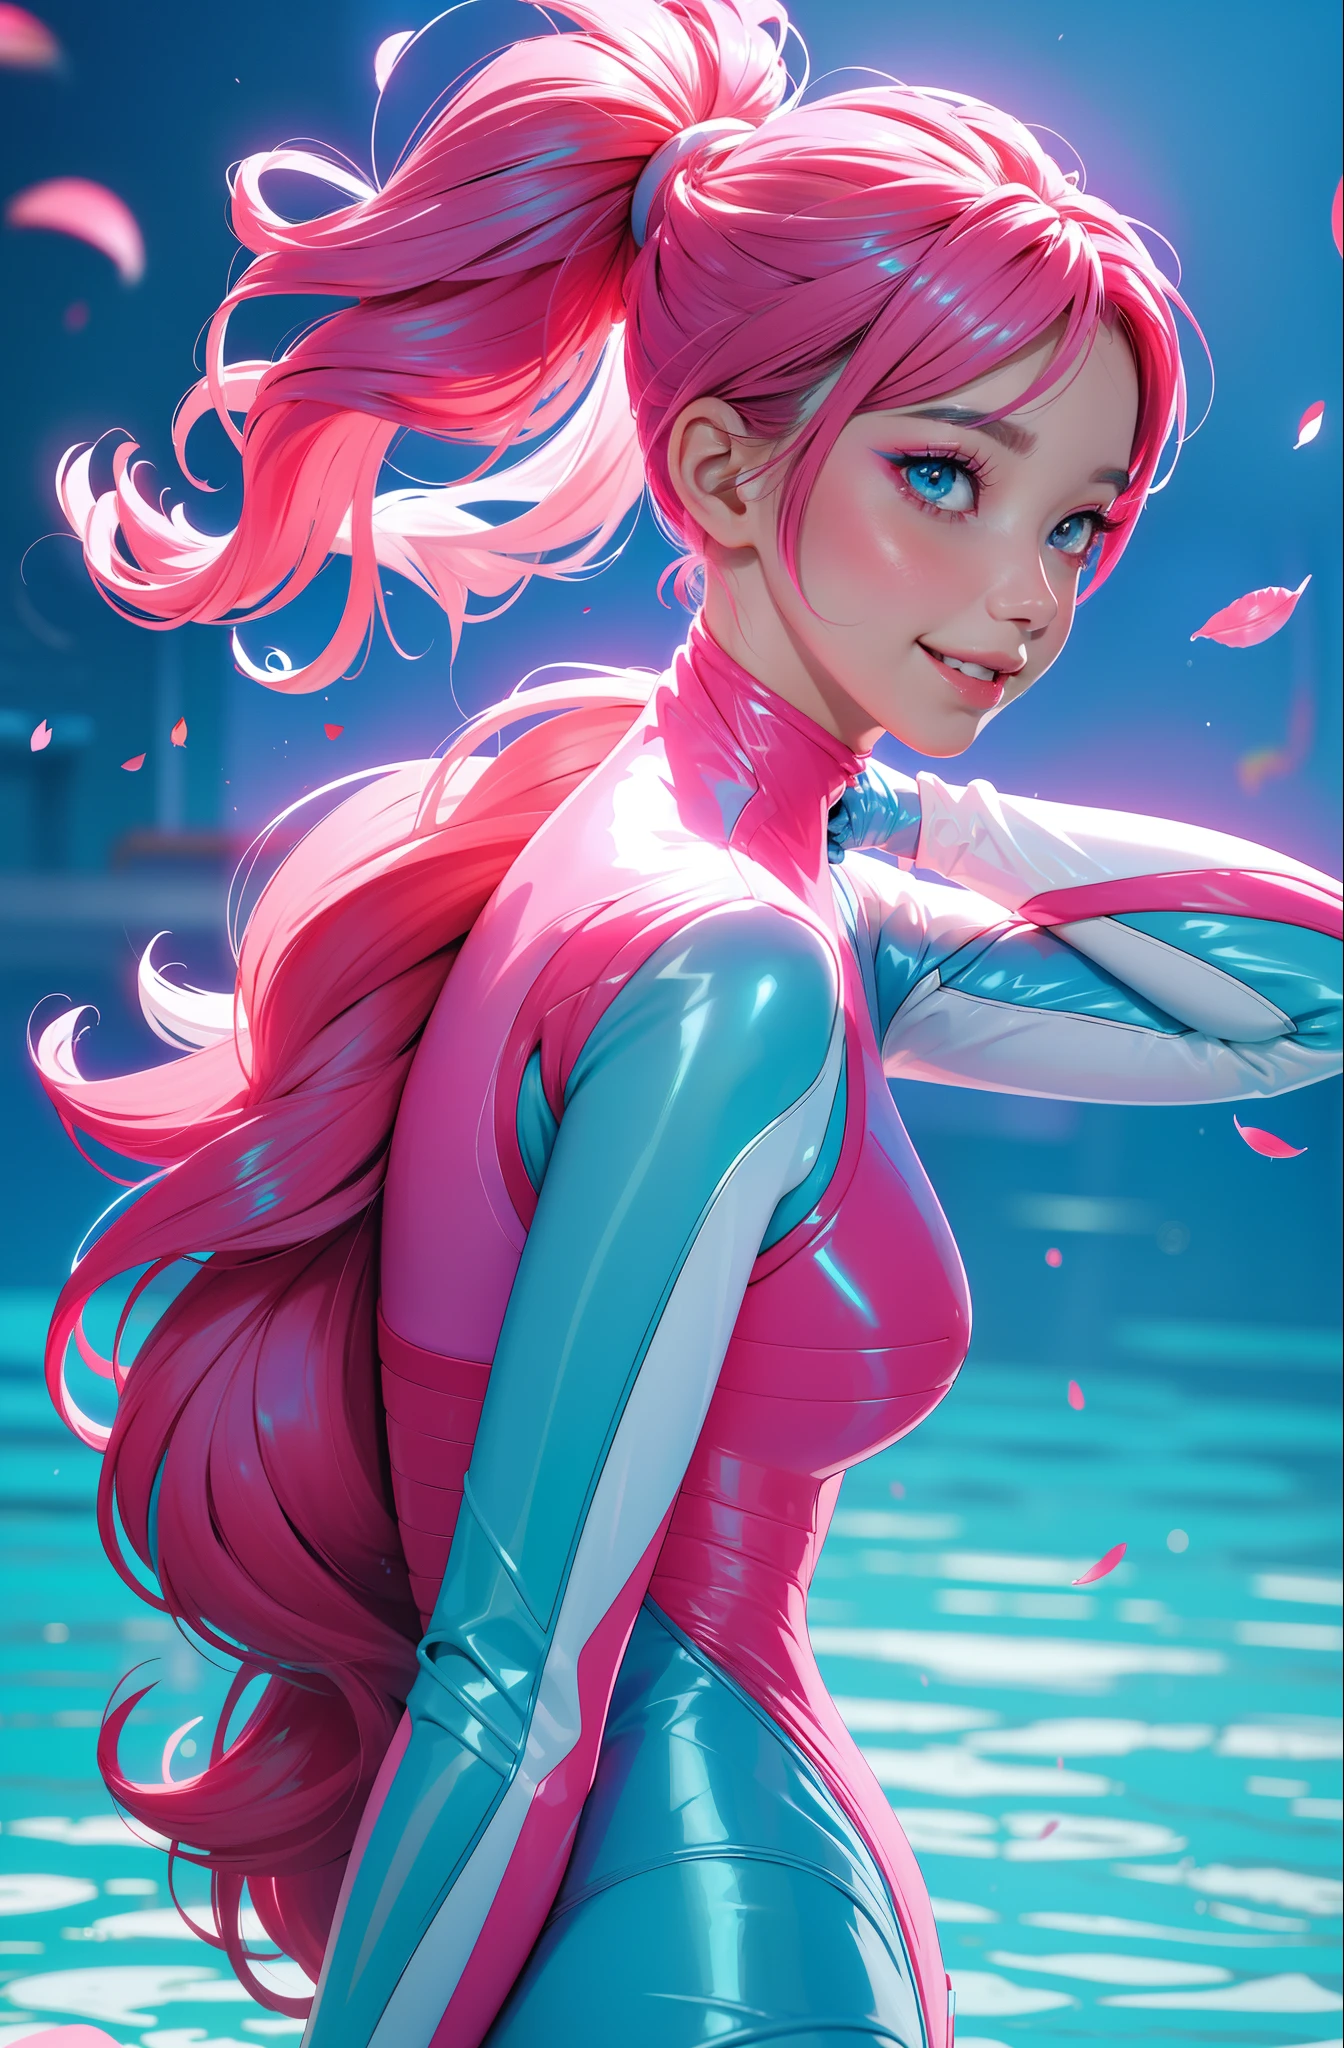 cyberpunk female woman (chromatic accents:1.1), sleek pink and White full bodysuit, side view turning to face camera, (Petal Blush, Lagoon Blue color background:1.3), amazing smile, looking at camera, golden hour
